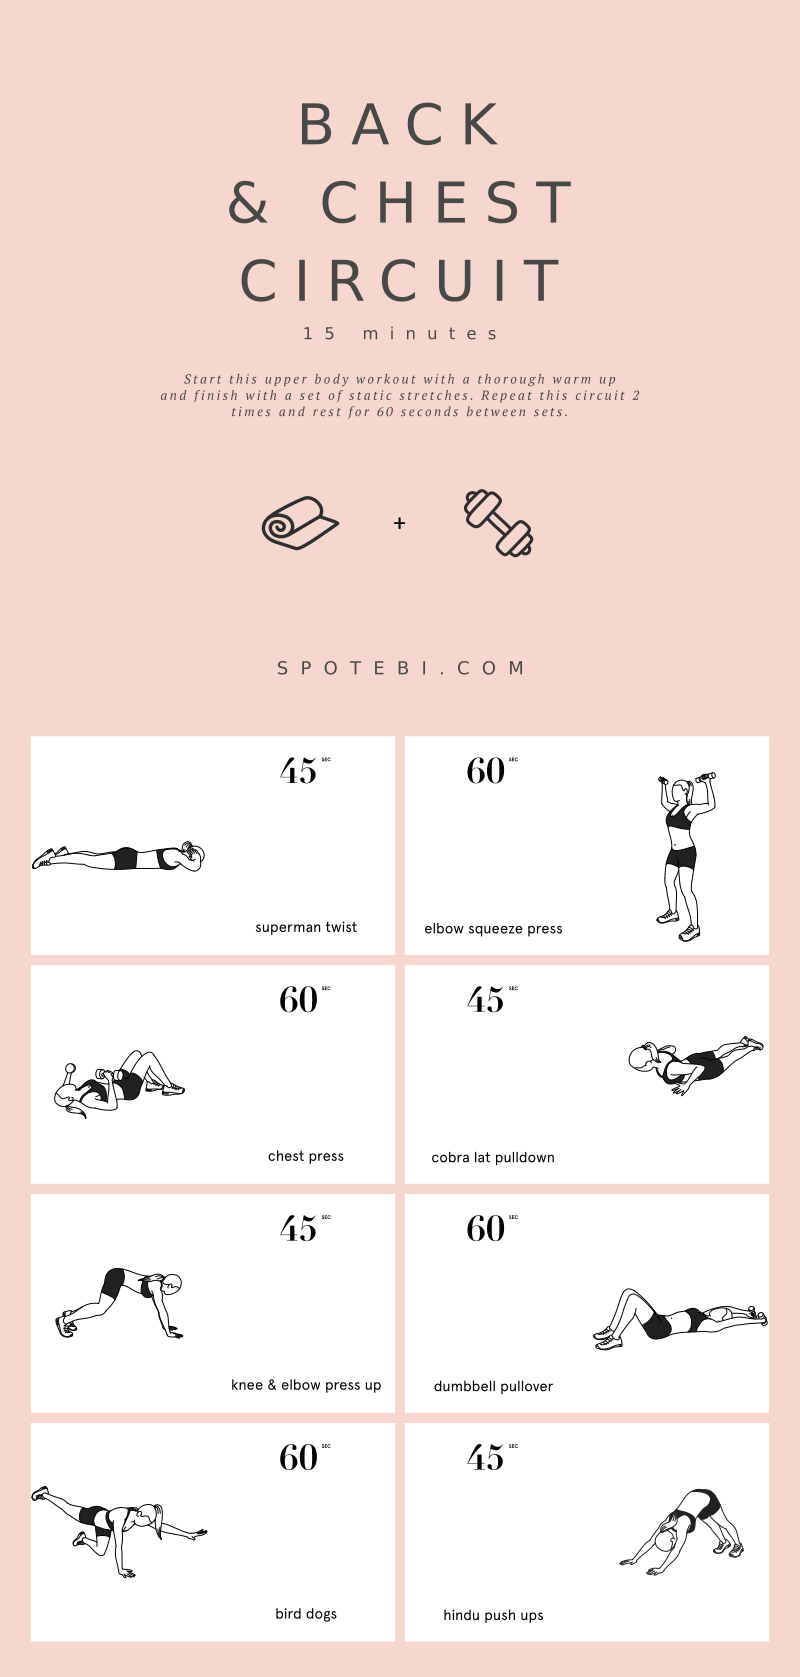 Try this 15-Minute Back and Chest Circuit today to tone your muscles and get a stronger and leaner upper body! https://www.spotebi.com/workout-routines/15-minute-back-chest-circuit/